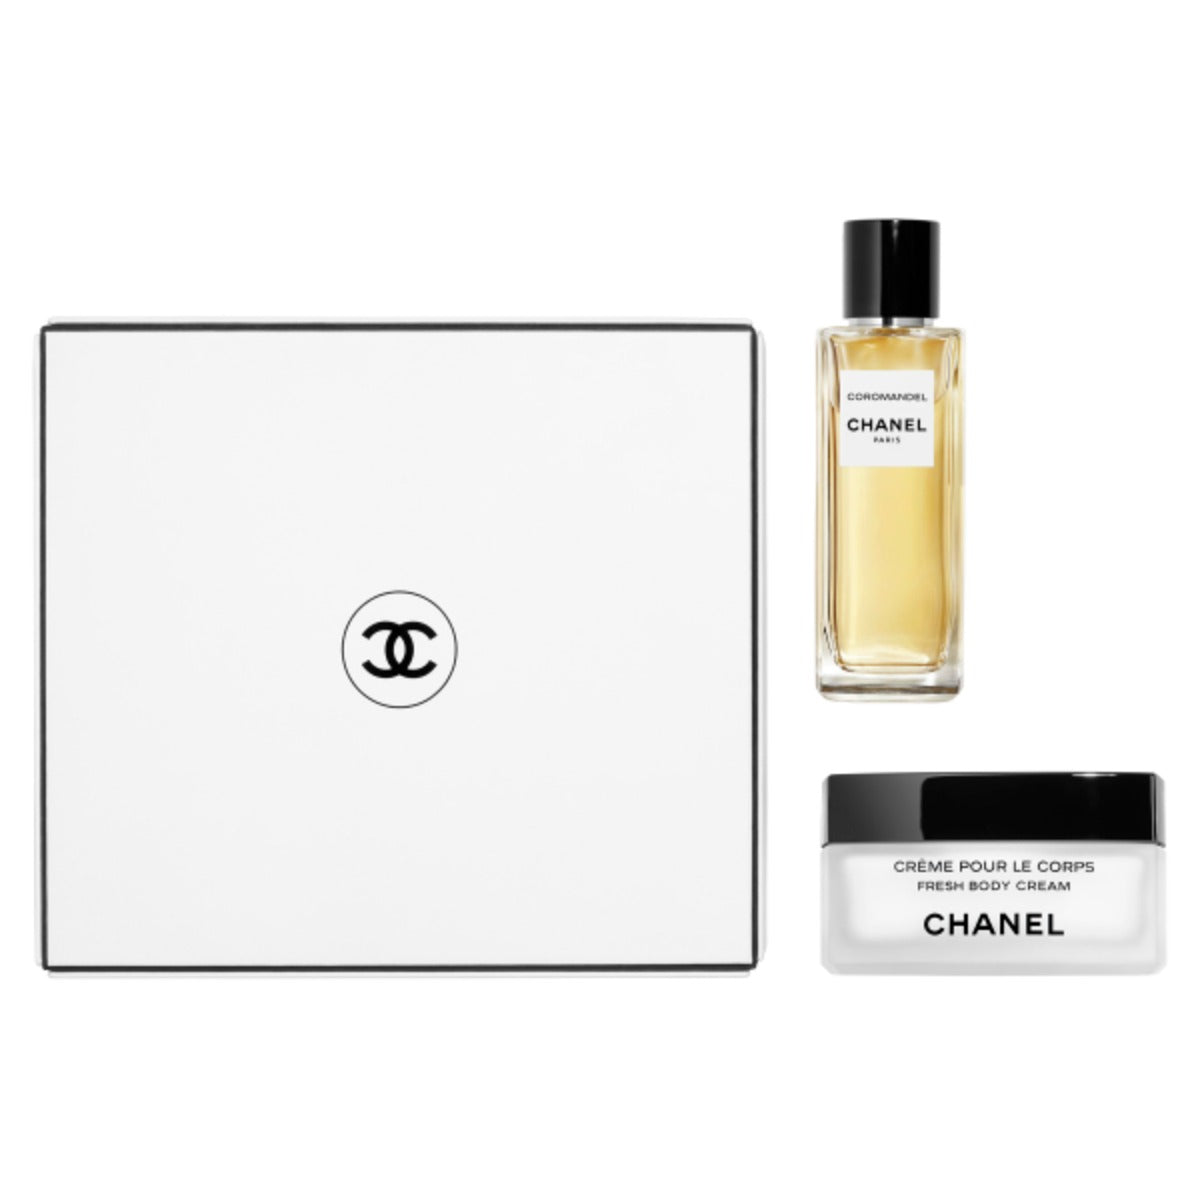 Les Exclusifs de Chanel: the disruption of norms in perfumery